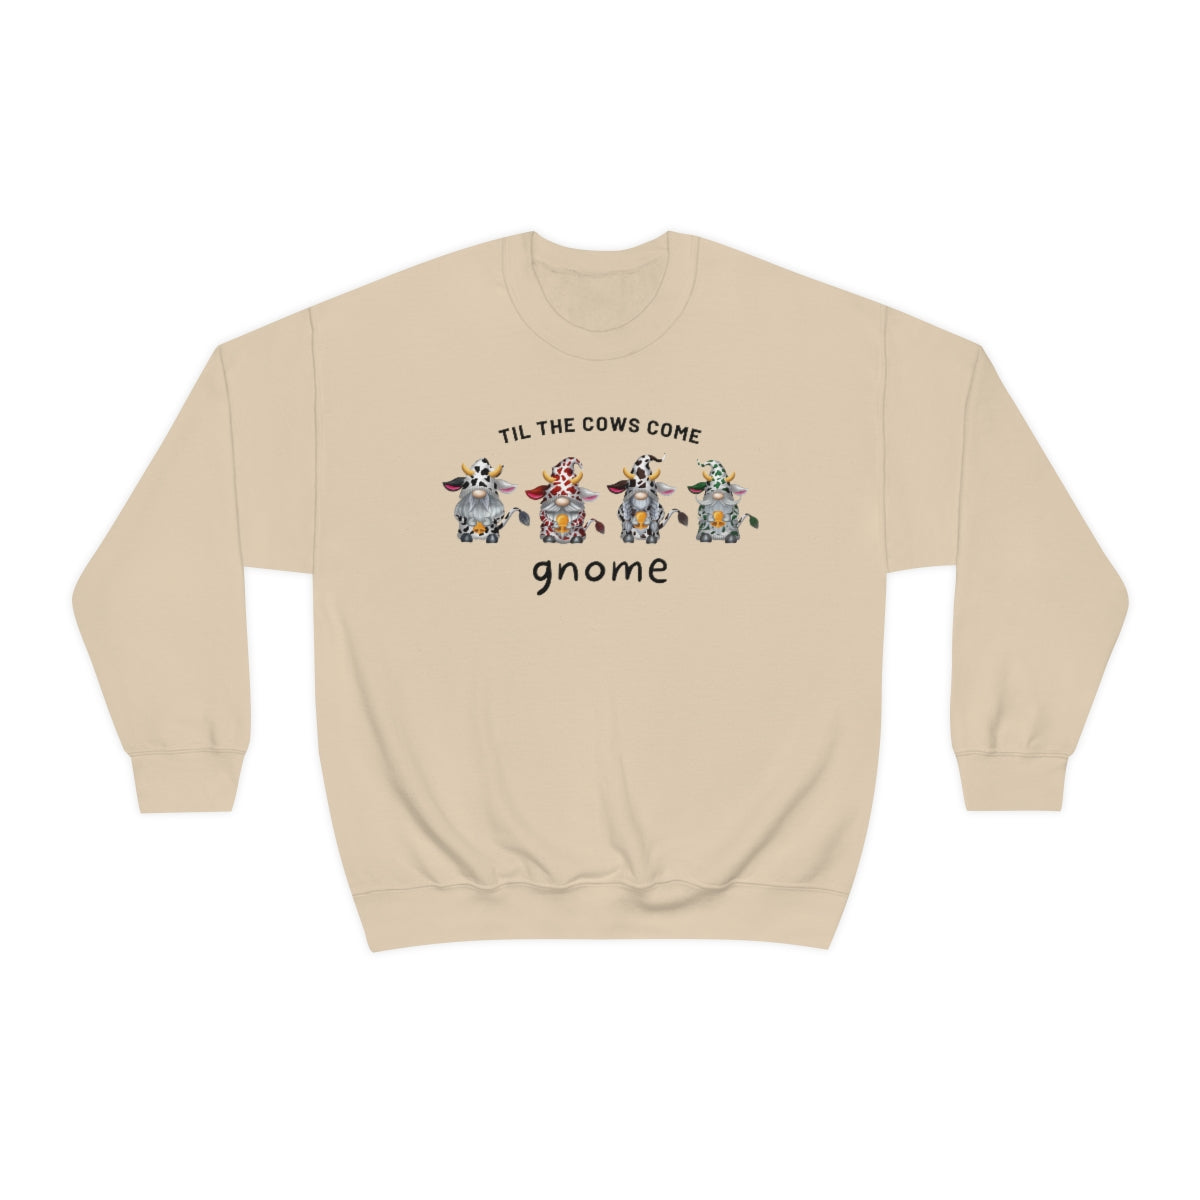 Til The Cows Come Gnome Sweatshirt, Funny Gnome Gifts, Gnome Shirt, Gnomes in Cow Print Sweaters, Winter Gnomes